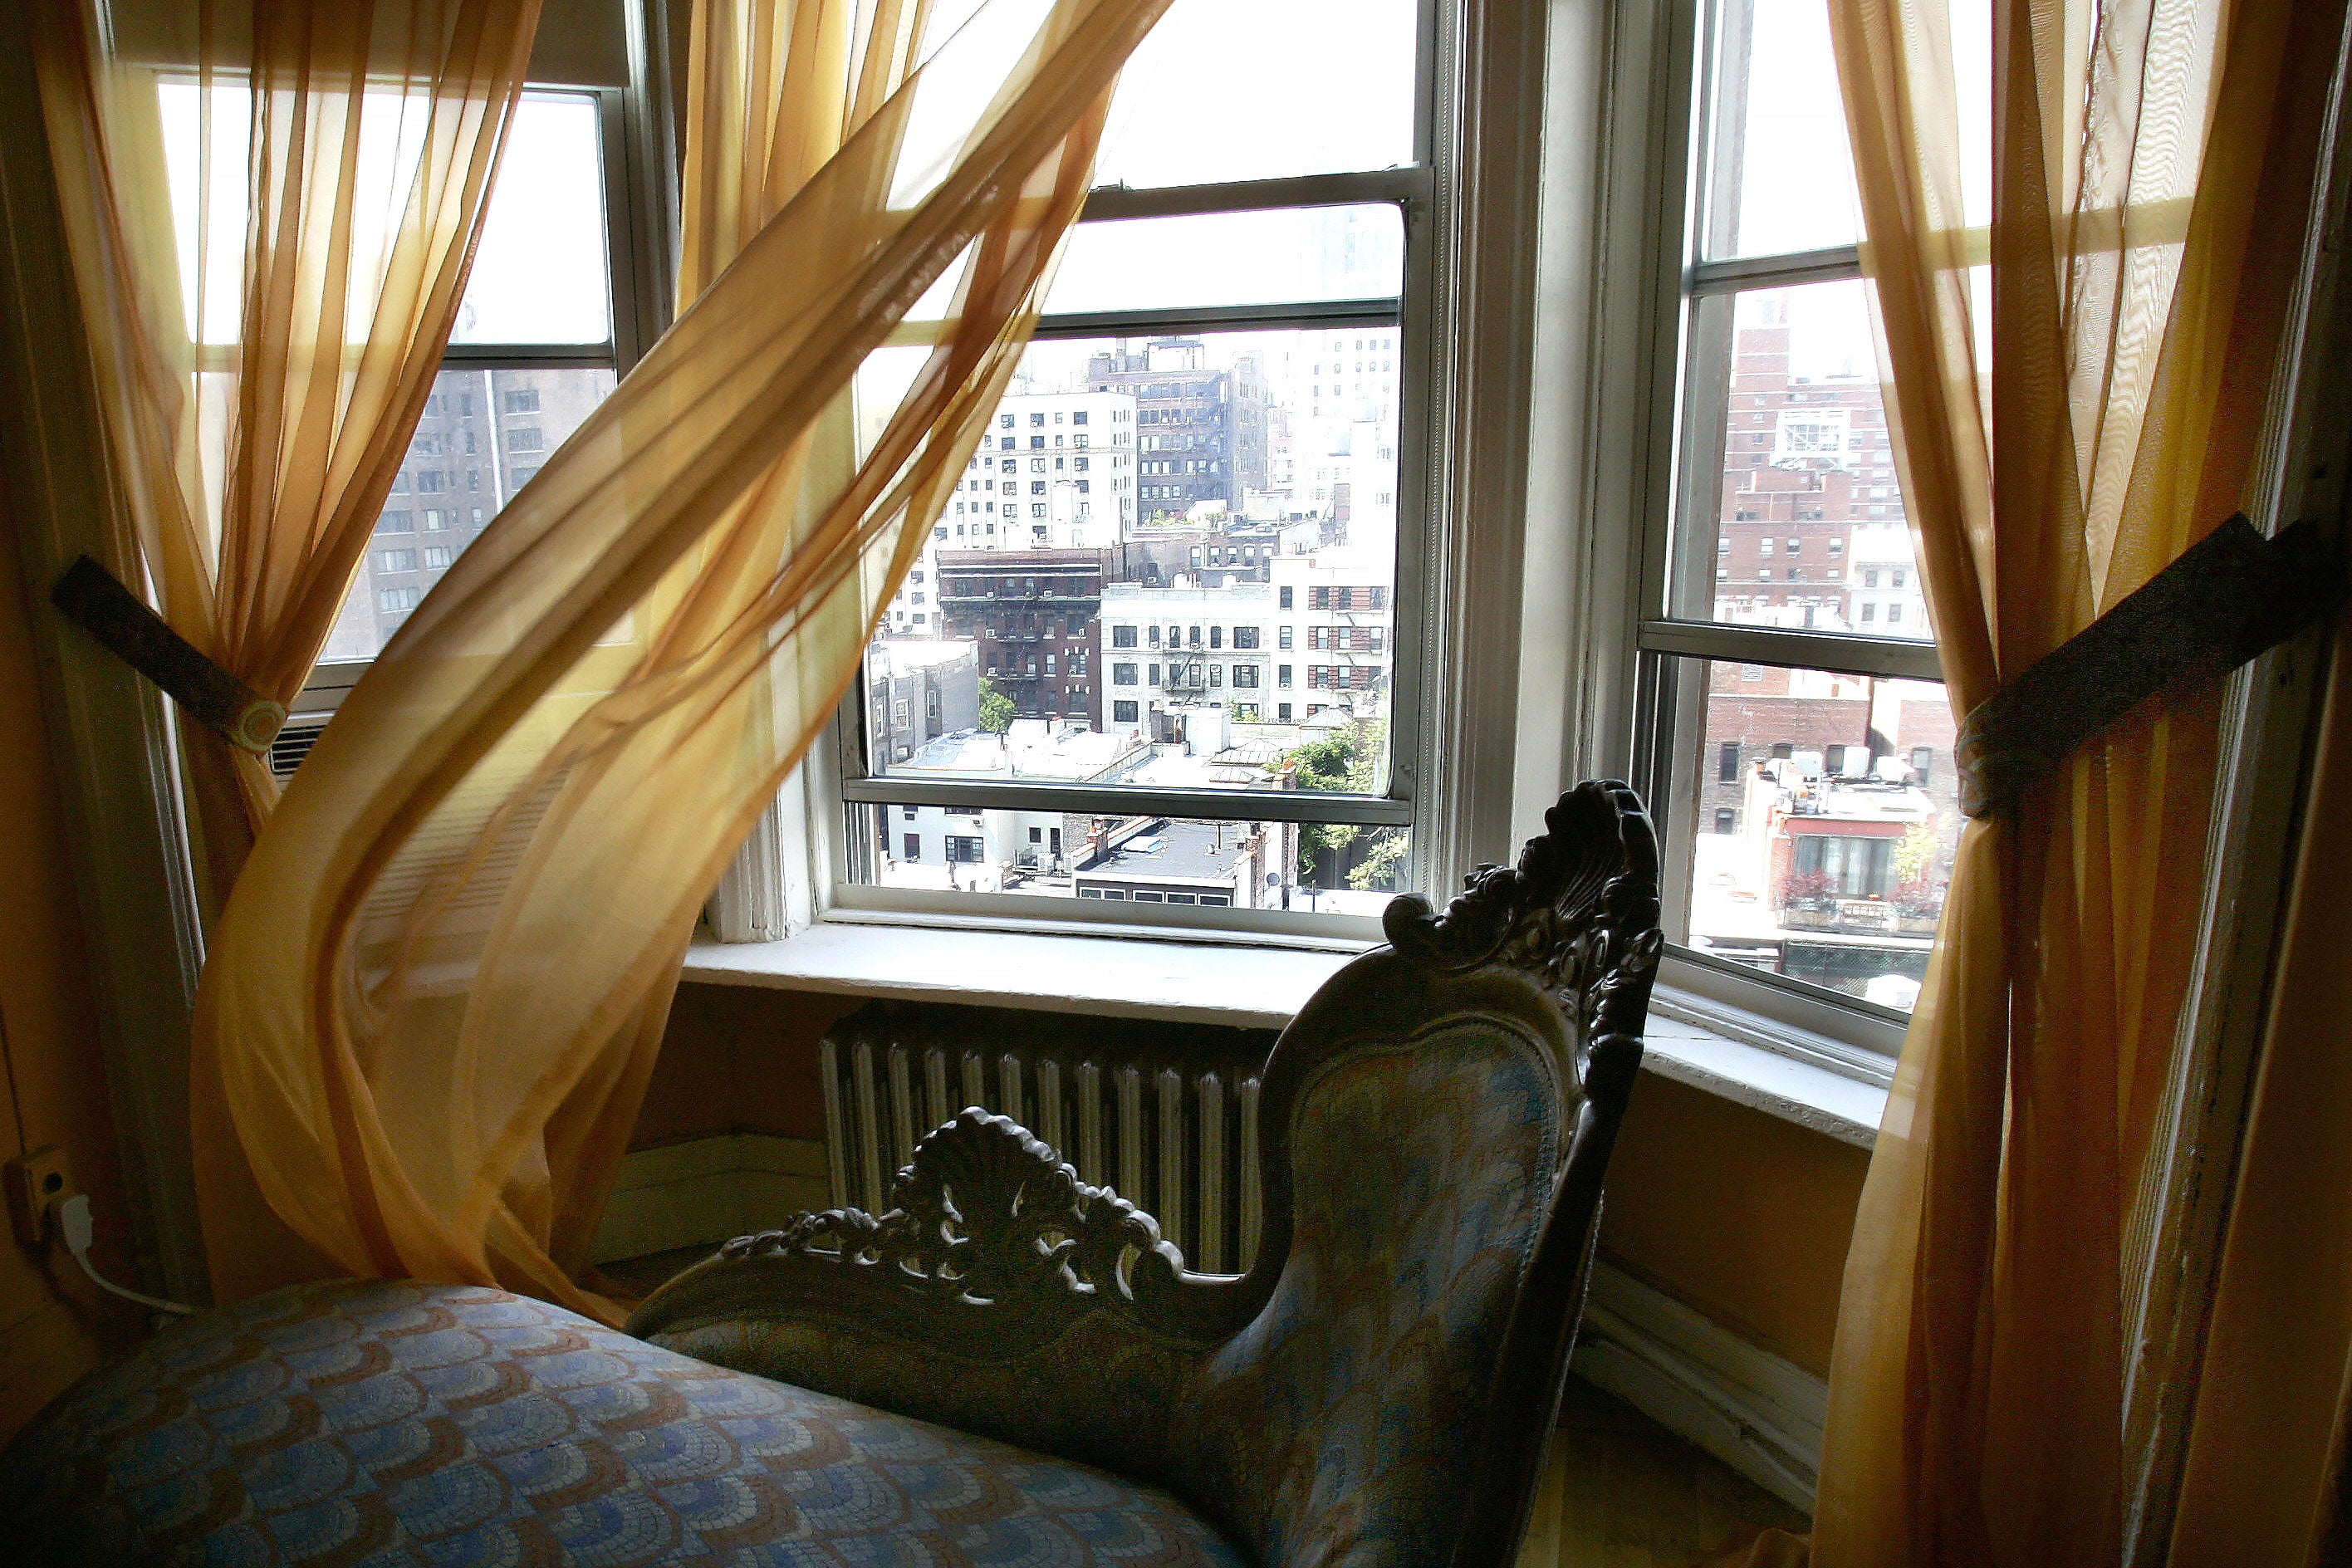 A room in the Chelsea Hotel overlooking the city and the curtains pulled to the side.